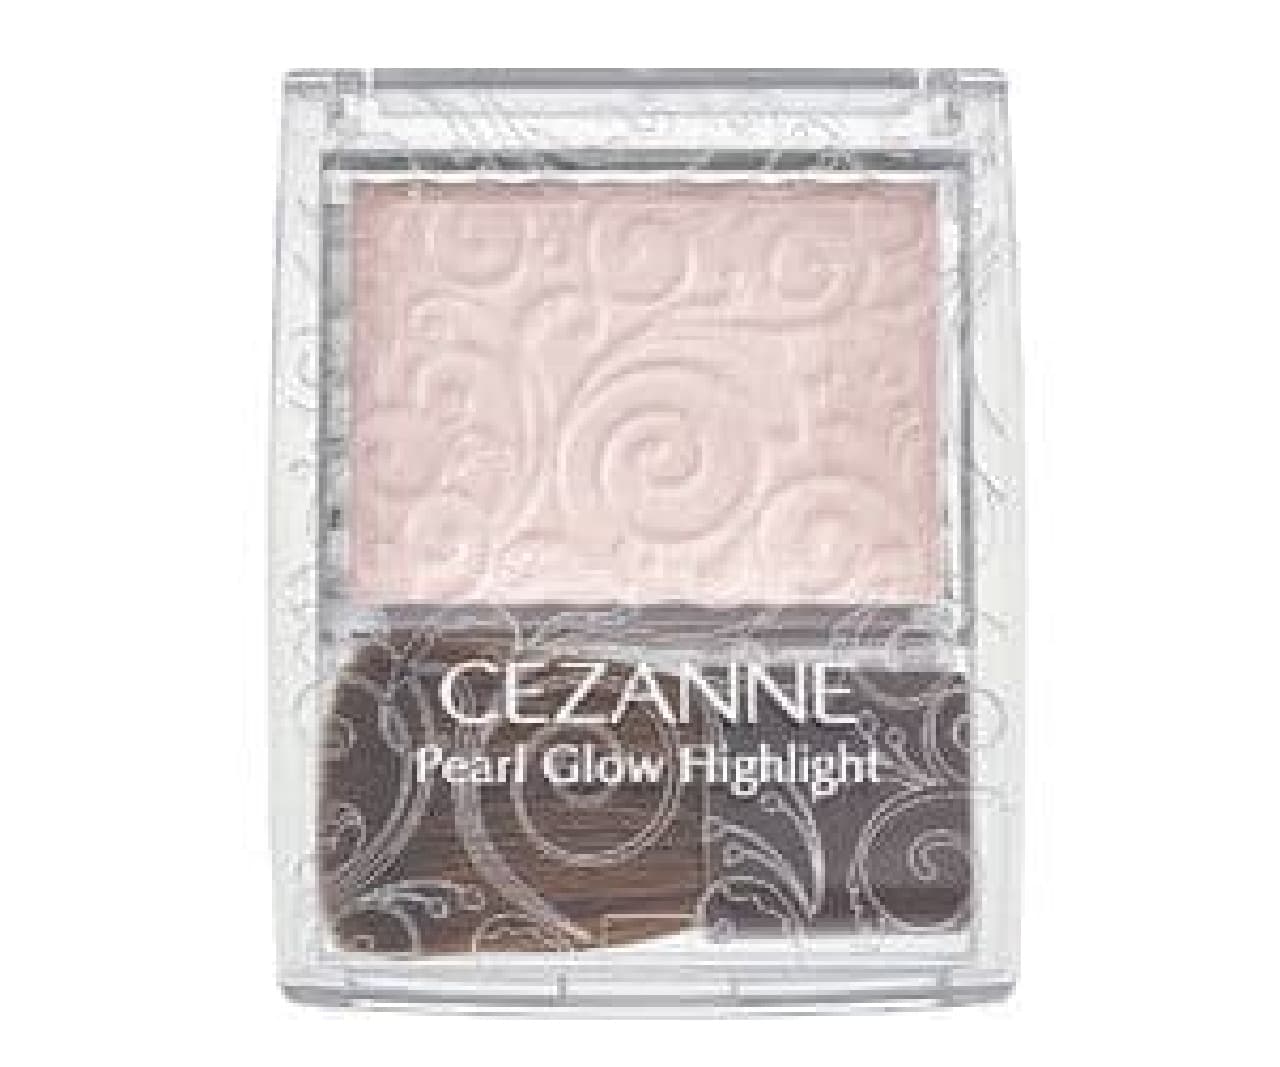 Cezanne "Pearl Glow Highlight" new color "04 Shell Pink"